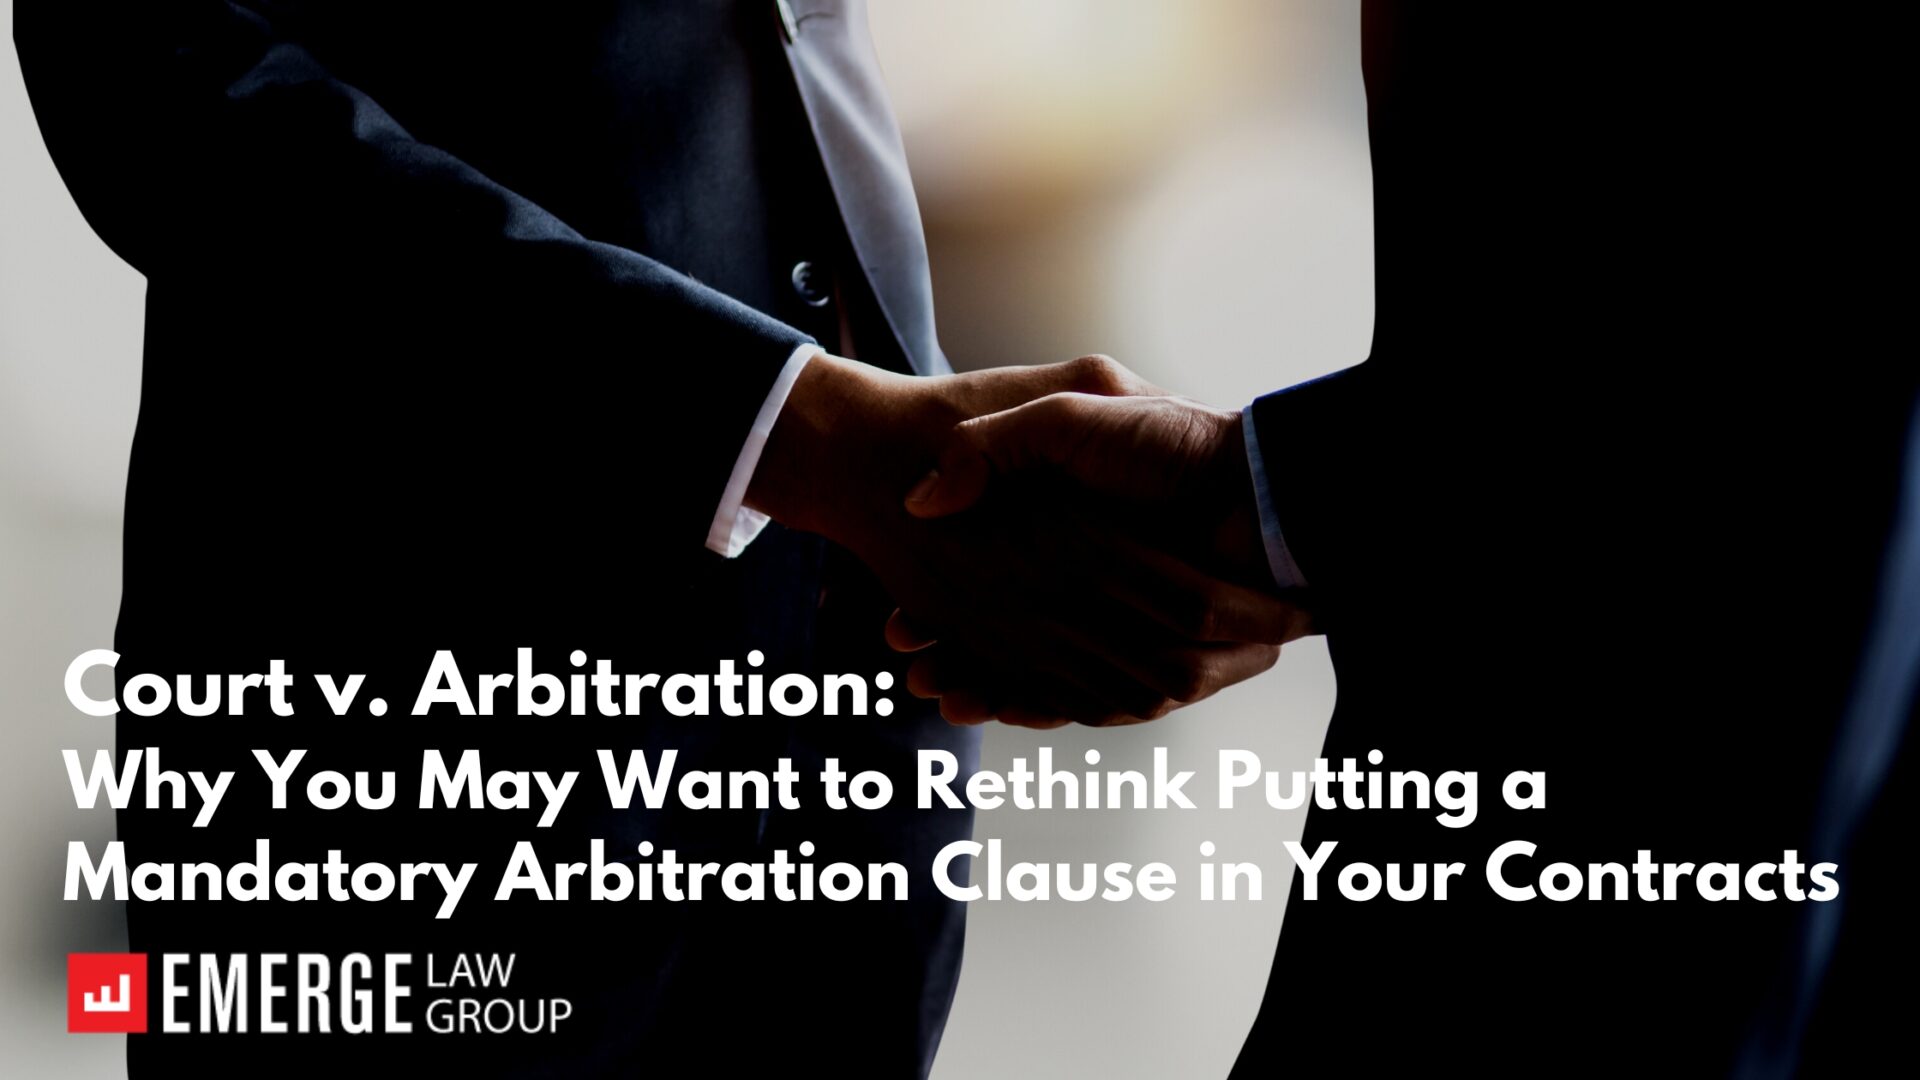 Court v. Arbitration:  Why You May Want to Rethink Putting a Mandatory Arbitration Clause in Your Contracts